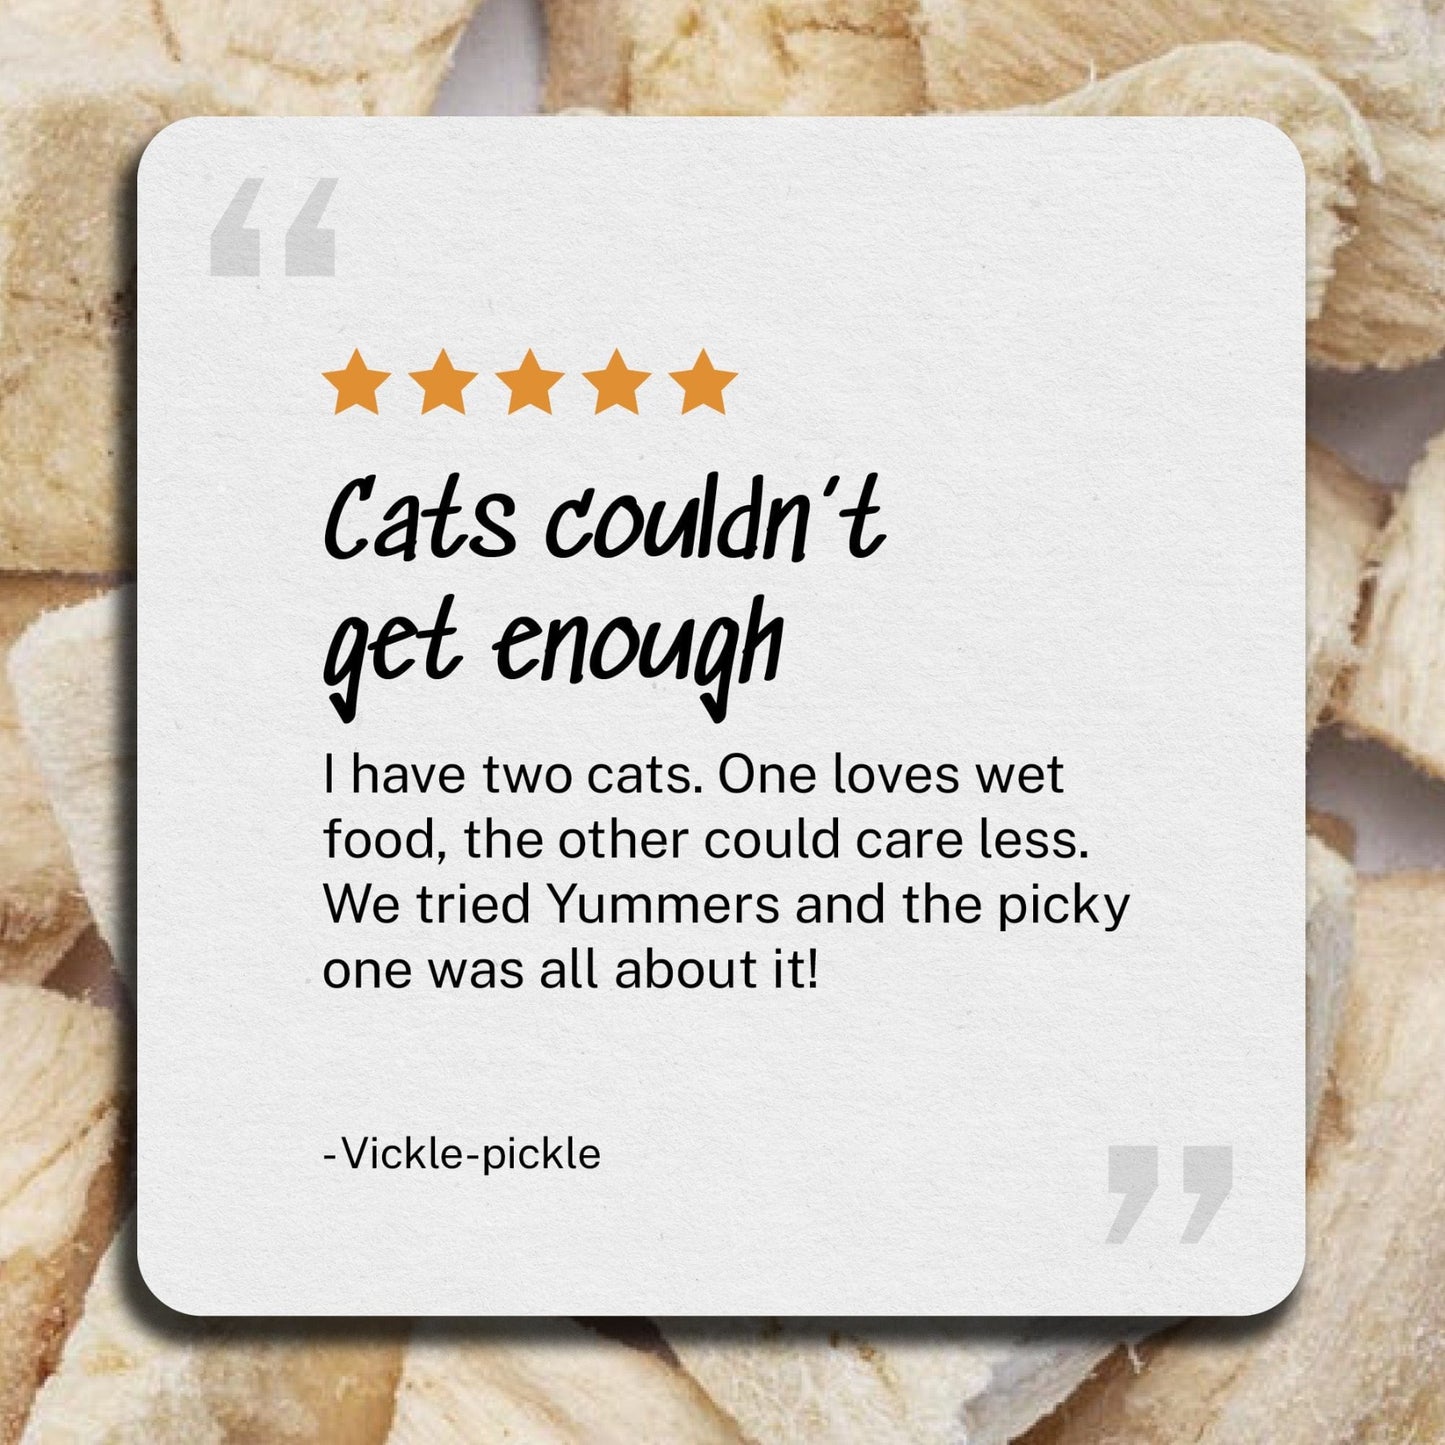 Review: Cats couldn't get enough - I have two cats. One loves wet food, the other could care less.  We tried Yummers and the picky one was all about it! = Vickle-pickle